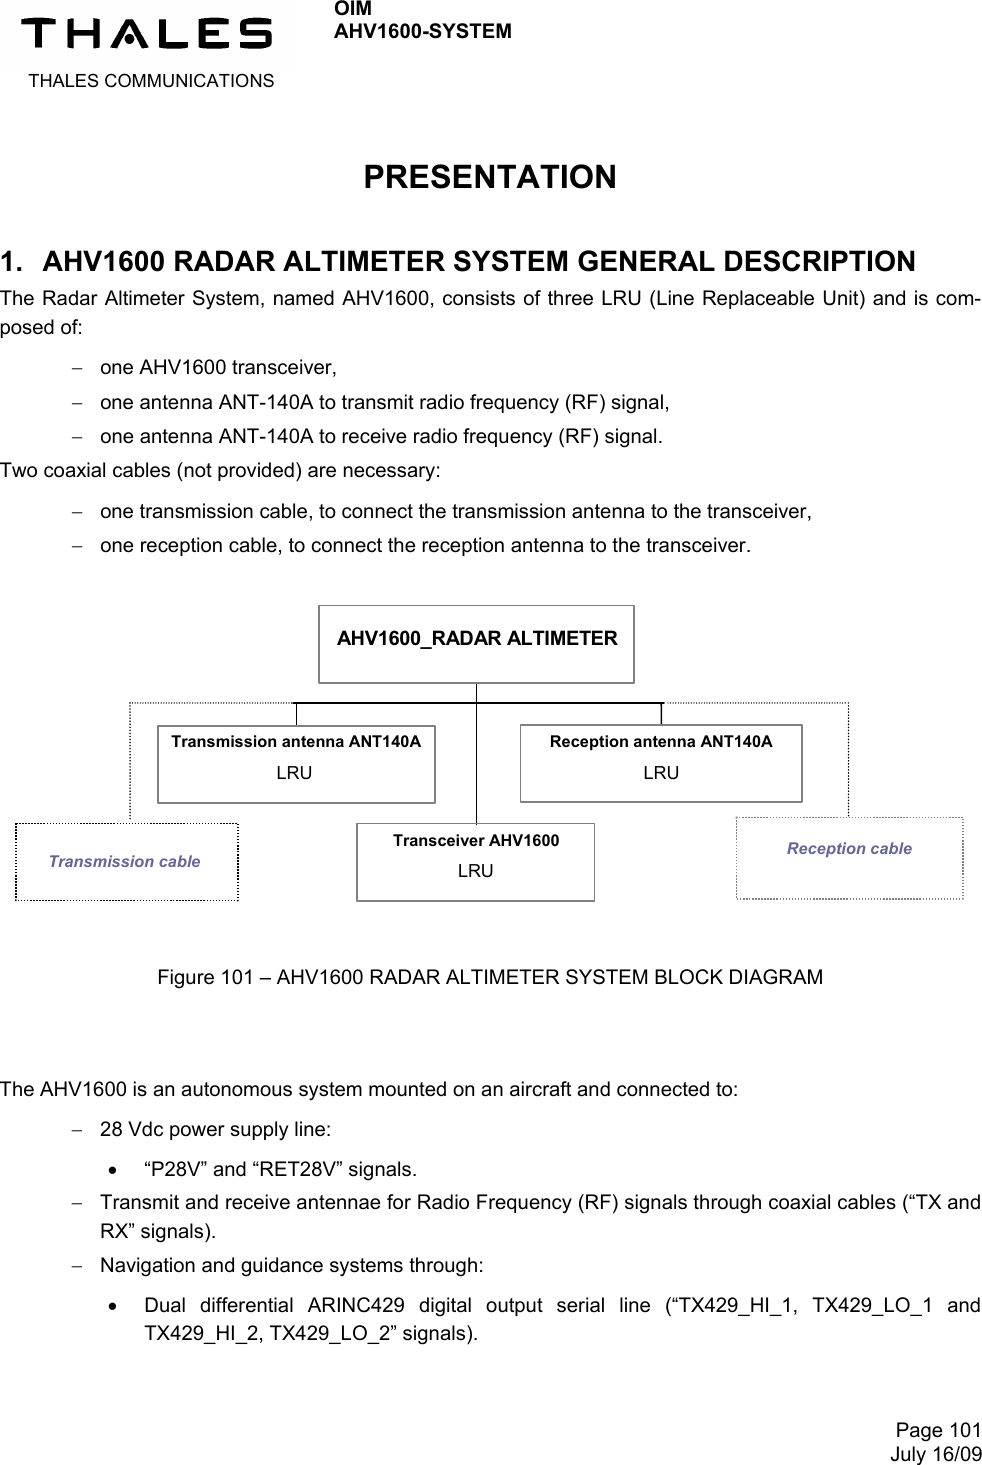  THALES COMMUNICATIONS OIM AHV1600-SYSTEM     Page 101July 16/09 PRESENTATION 1.  AHV1600 RADAR ALTIMETER SYSTEM GENERAL DESCRIPTION The Radar Altimeter System, named AHV1600, consists of three LRU (Line Replaceable Unit) and is com-posed of:  one AHV1600 transceiver,   one antenna ANT-140A to transmit radio frequency (RF) signal,   one antenna ANT-140A to receive radio frequency (RF) signal. Two coaxial cables (not provided) are necessary:  one transmission cable, to connect the transmission antenna to the transceiver,  one reception cable, to connect the reception antenna to the transceiver.   Transmission antenna ANT140A LRU Transceiver AHV1600 LRU Reception antenna ANT140A LRU AHV1600_RADAR ALTIMETERReception cable Transmission cable    Figure 101 – AHV1600 RADAR ALTIMETER SYSTEM BLOCK DIAGRAM    The AHV1600 is an autonomous system mounted on an aircraft and connected to:  28 Vdc power supply line:  “P28V” and “RET28V” signals.  Transmit and receive antennae for Radio Frequency (RF) signals through coaxial cables (“TX and RX” signals).  Navigation and guidance systems through:  Dual differential ARINC429 digital output serial line (“TX429_HI_1, TX429_LO_1 and TX429_HI_2, TX429_LO_2” signals).  